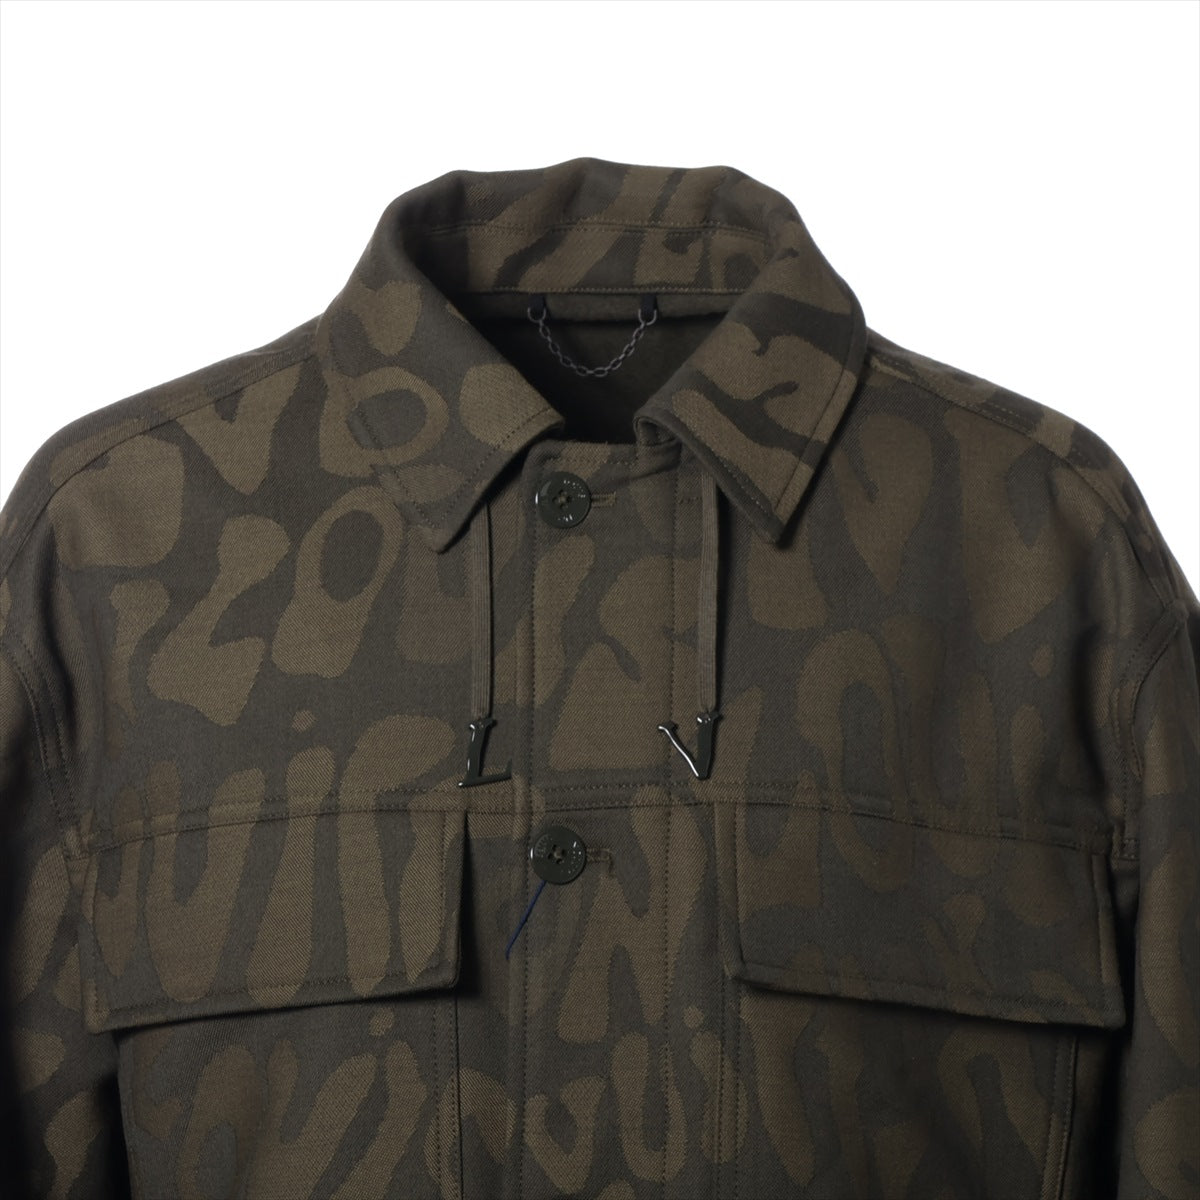 Louis Vuitton 23SS Wool & Nylon Jacket 46 Men's Green  RM231M with tag